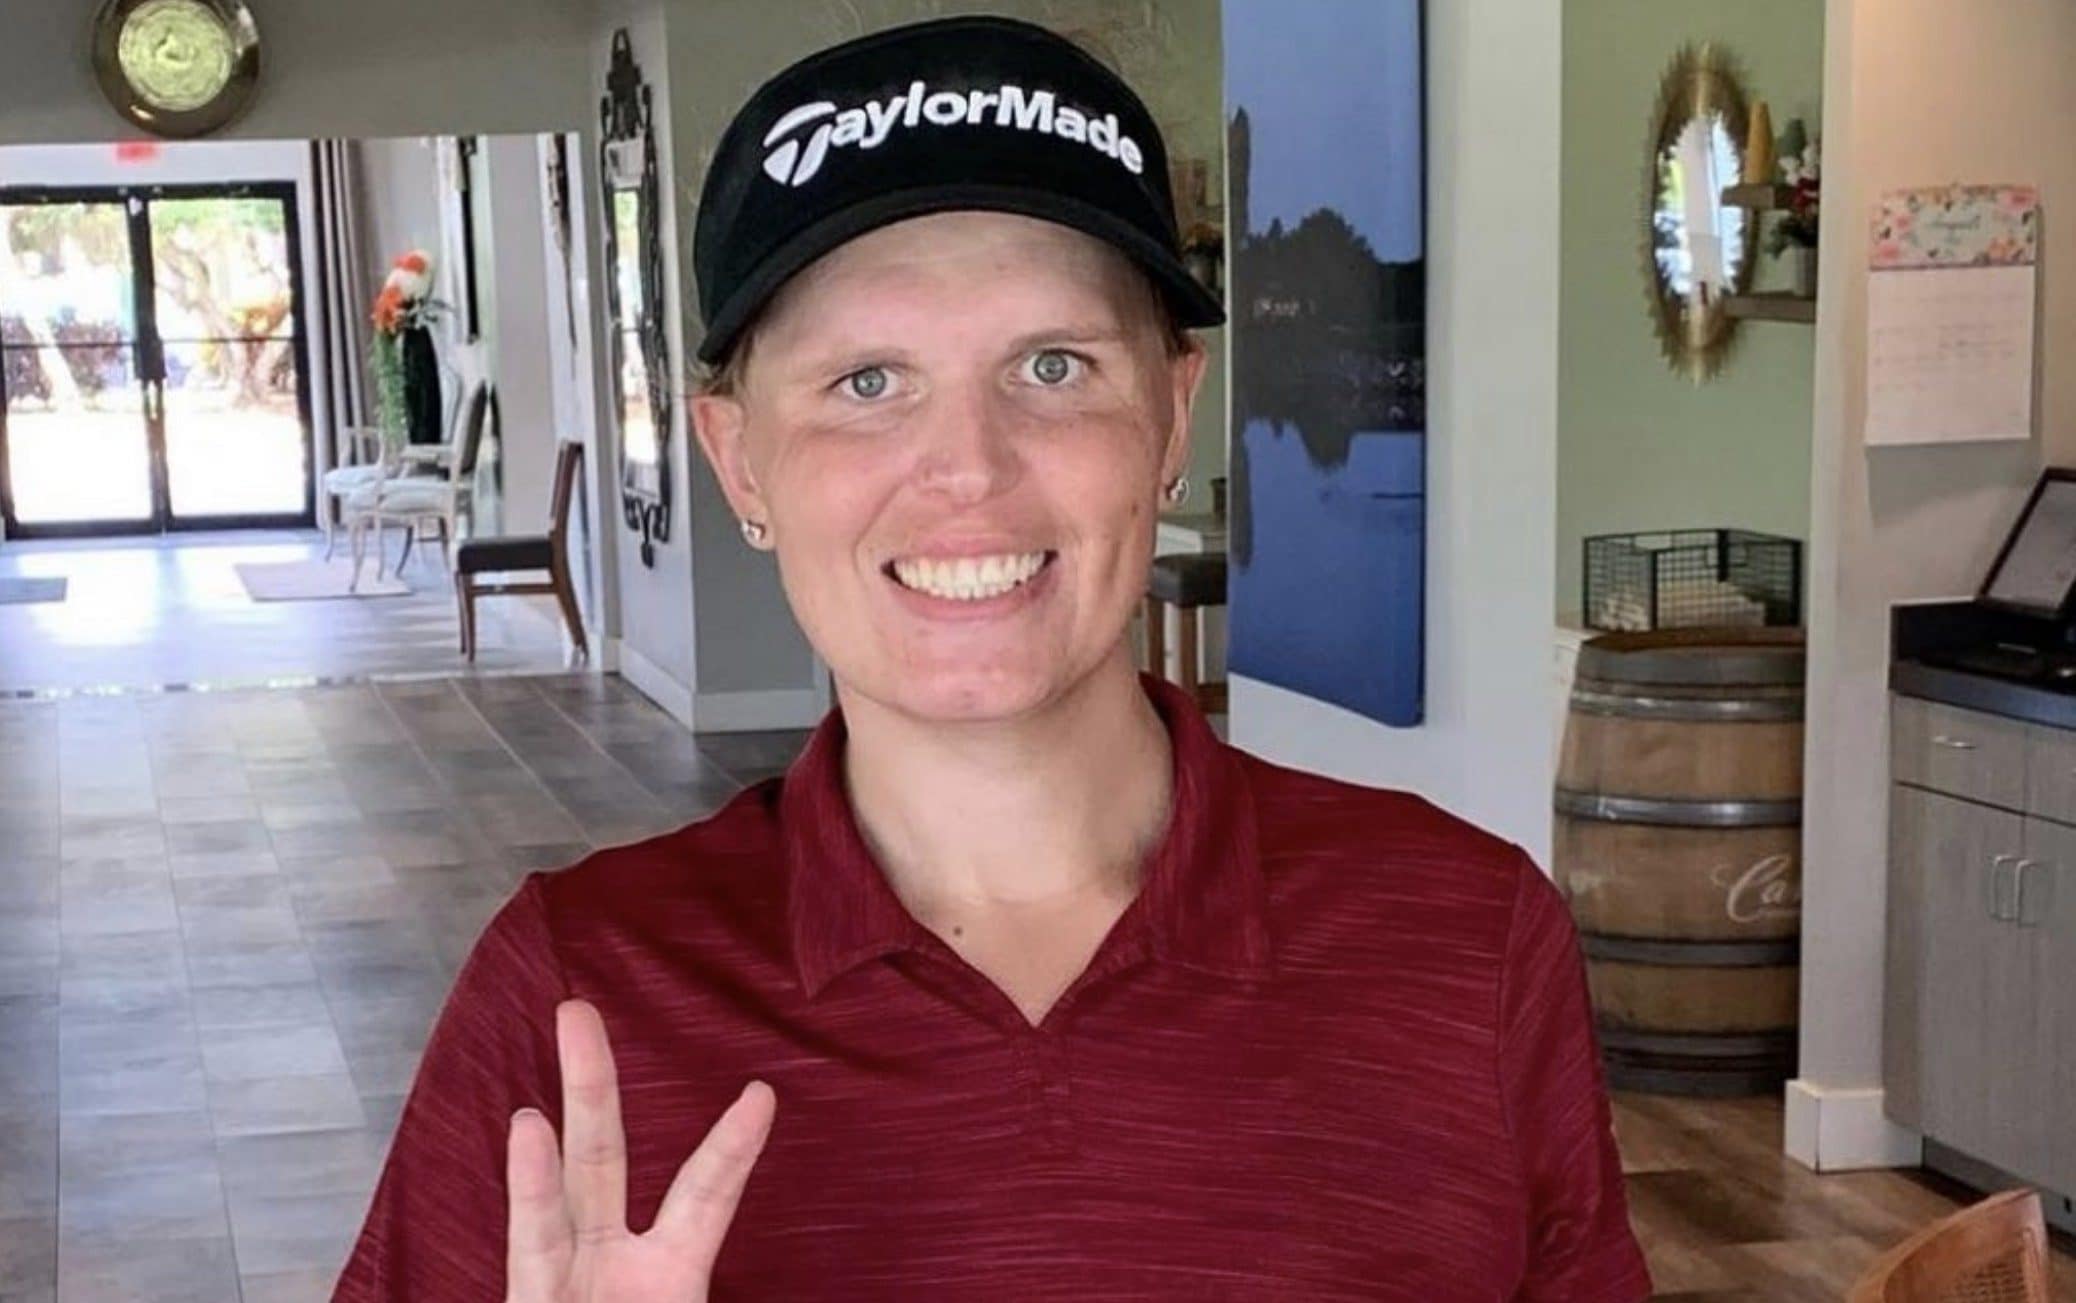 Golfer in trans row as she fights to join LPGA tour